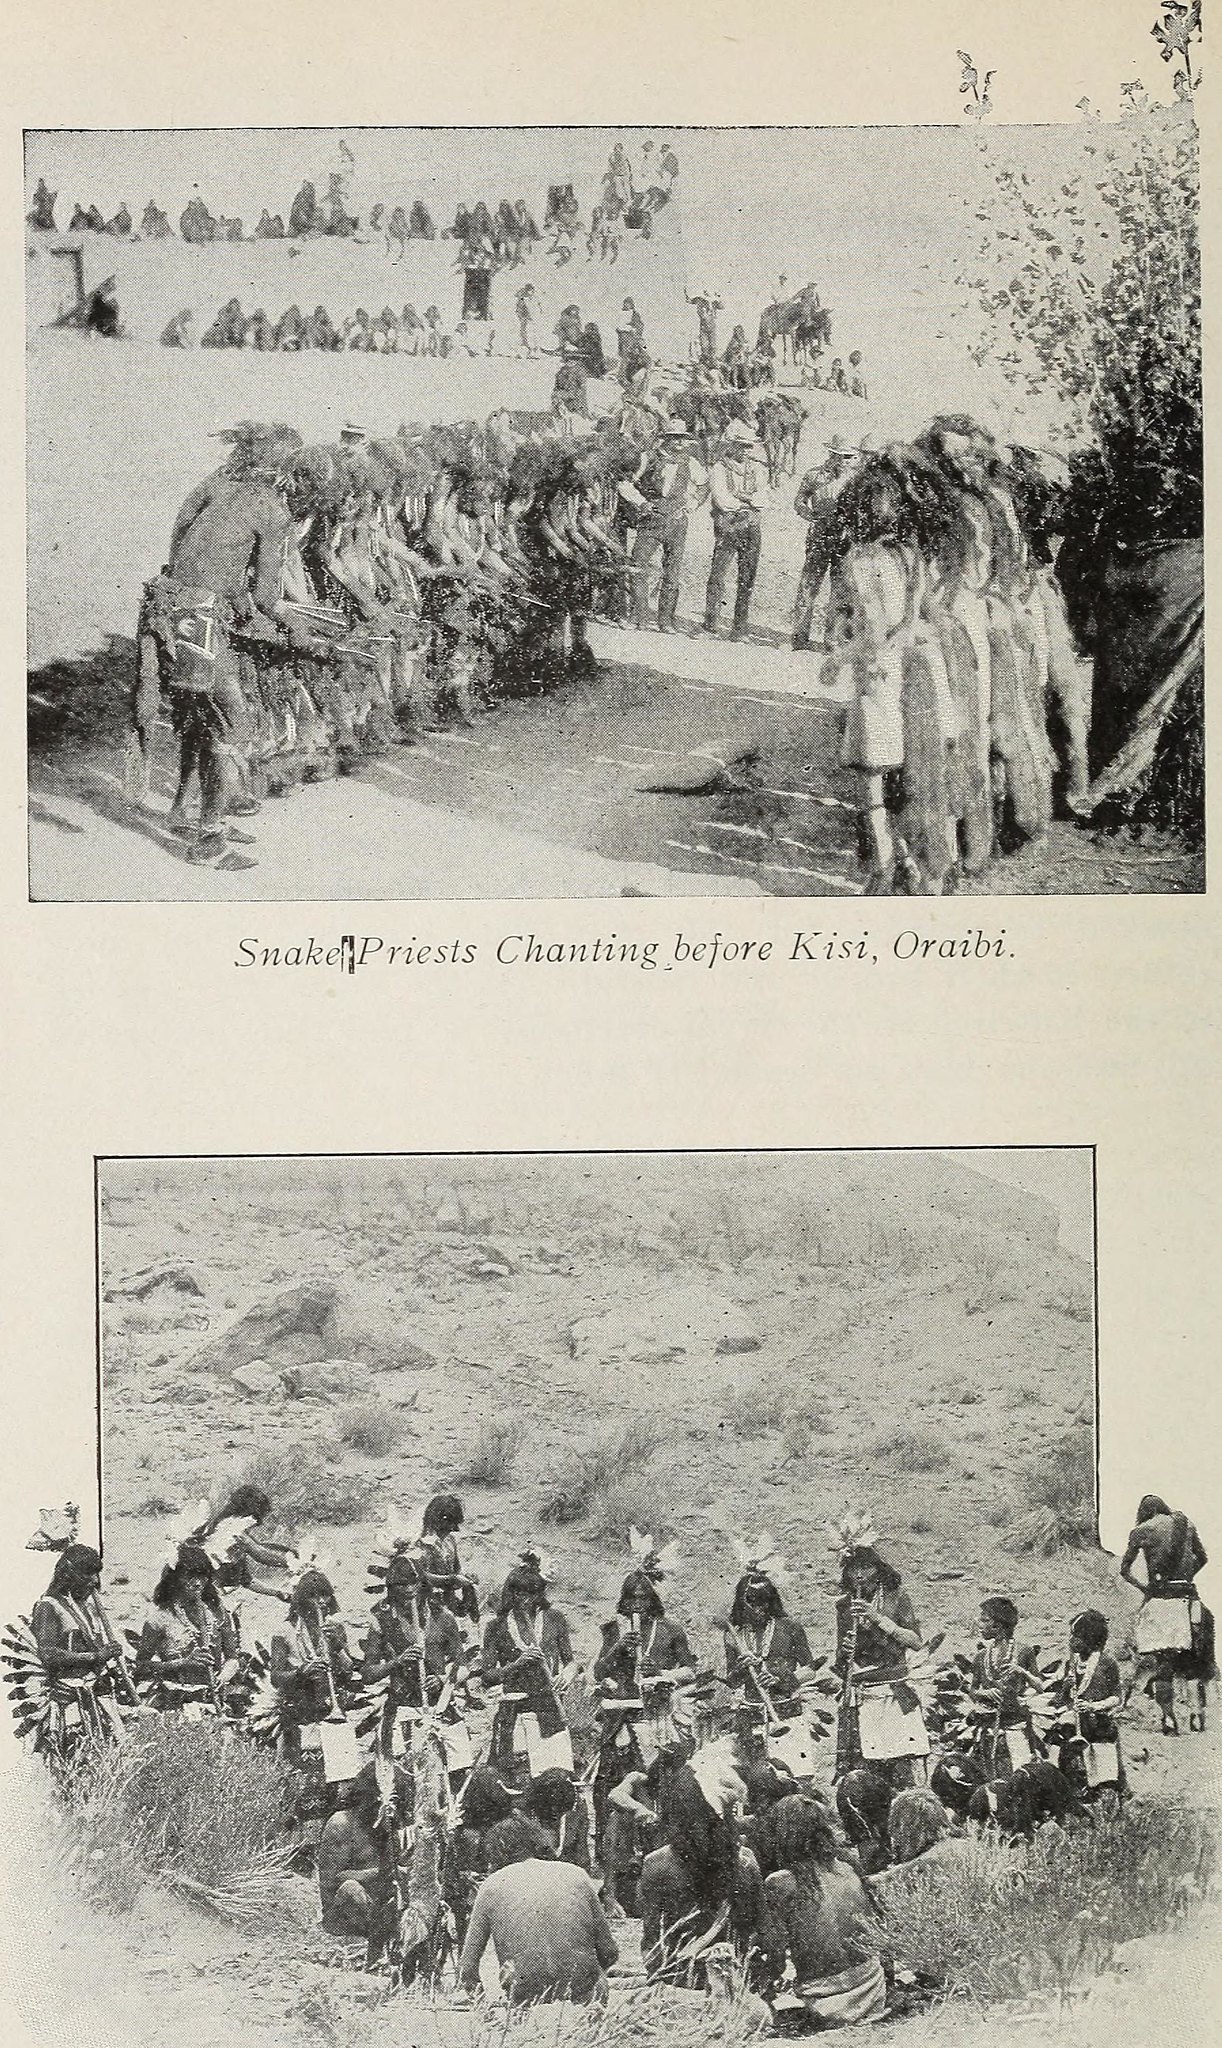 Image from page 141 of "Indians of the Southwest" (1903)